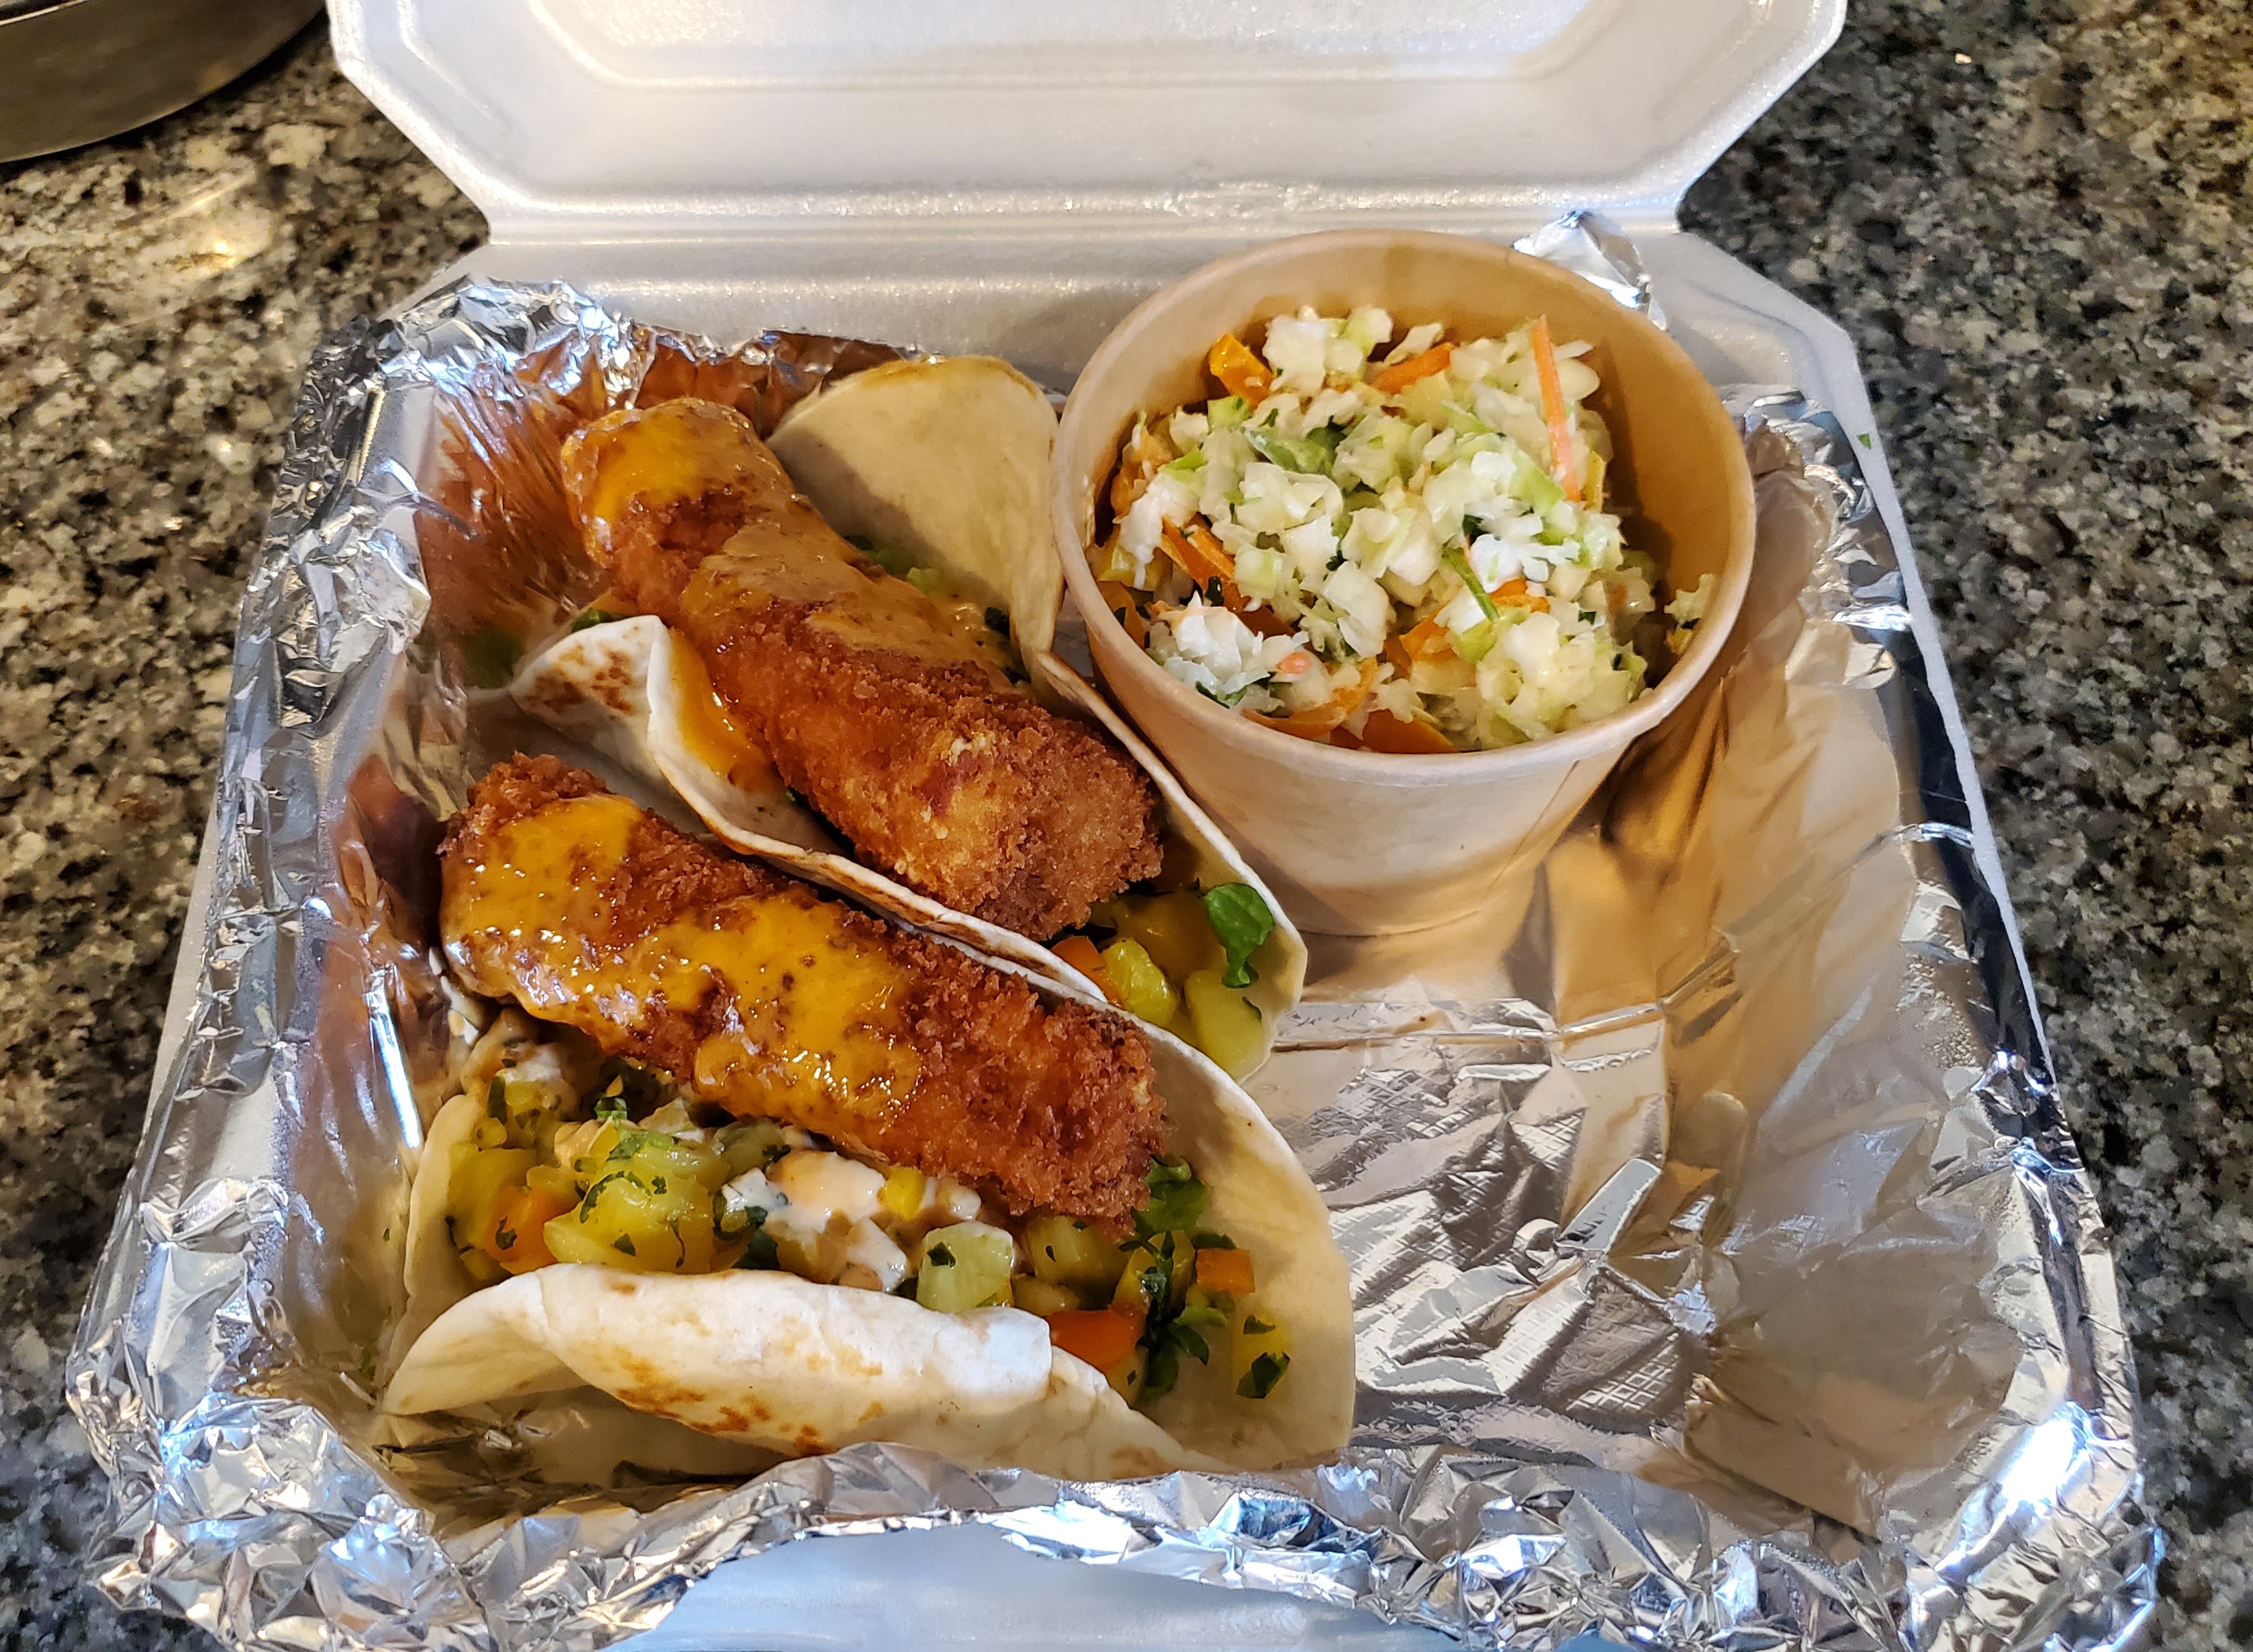 In a tin-foiled to go container, there are three fish tacos with crispy fried fish in flour tortillas with a cup of coleslaw. Top image by Carl Busch.